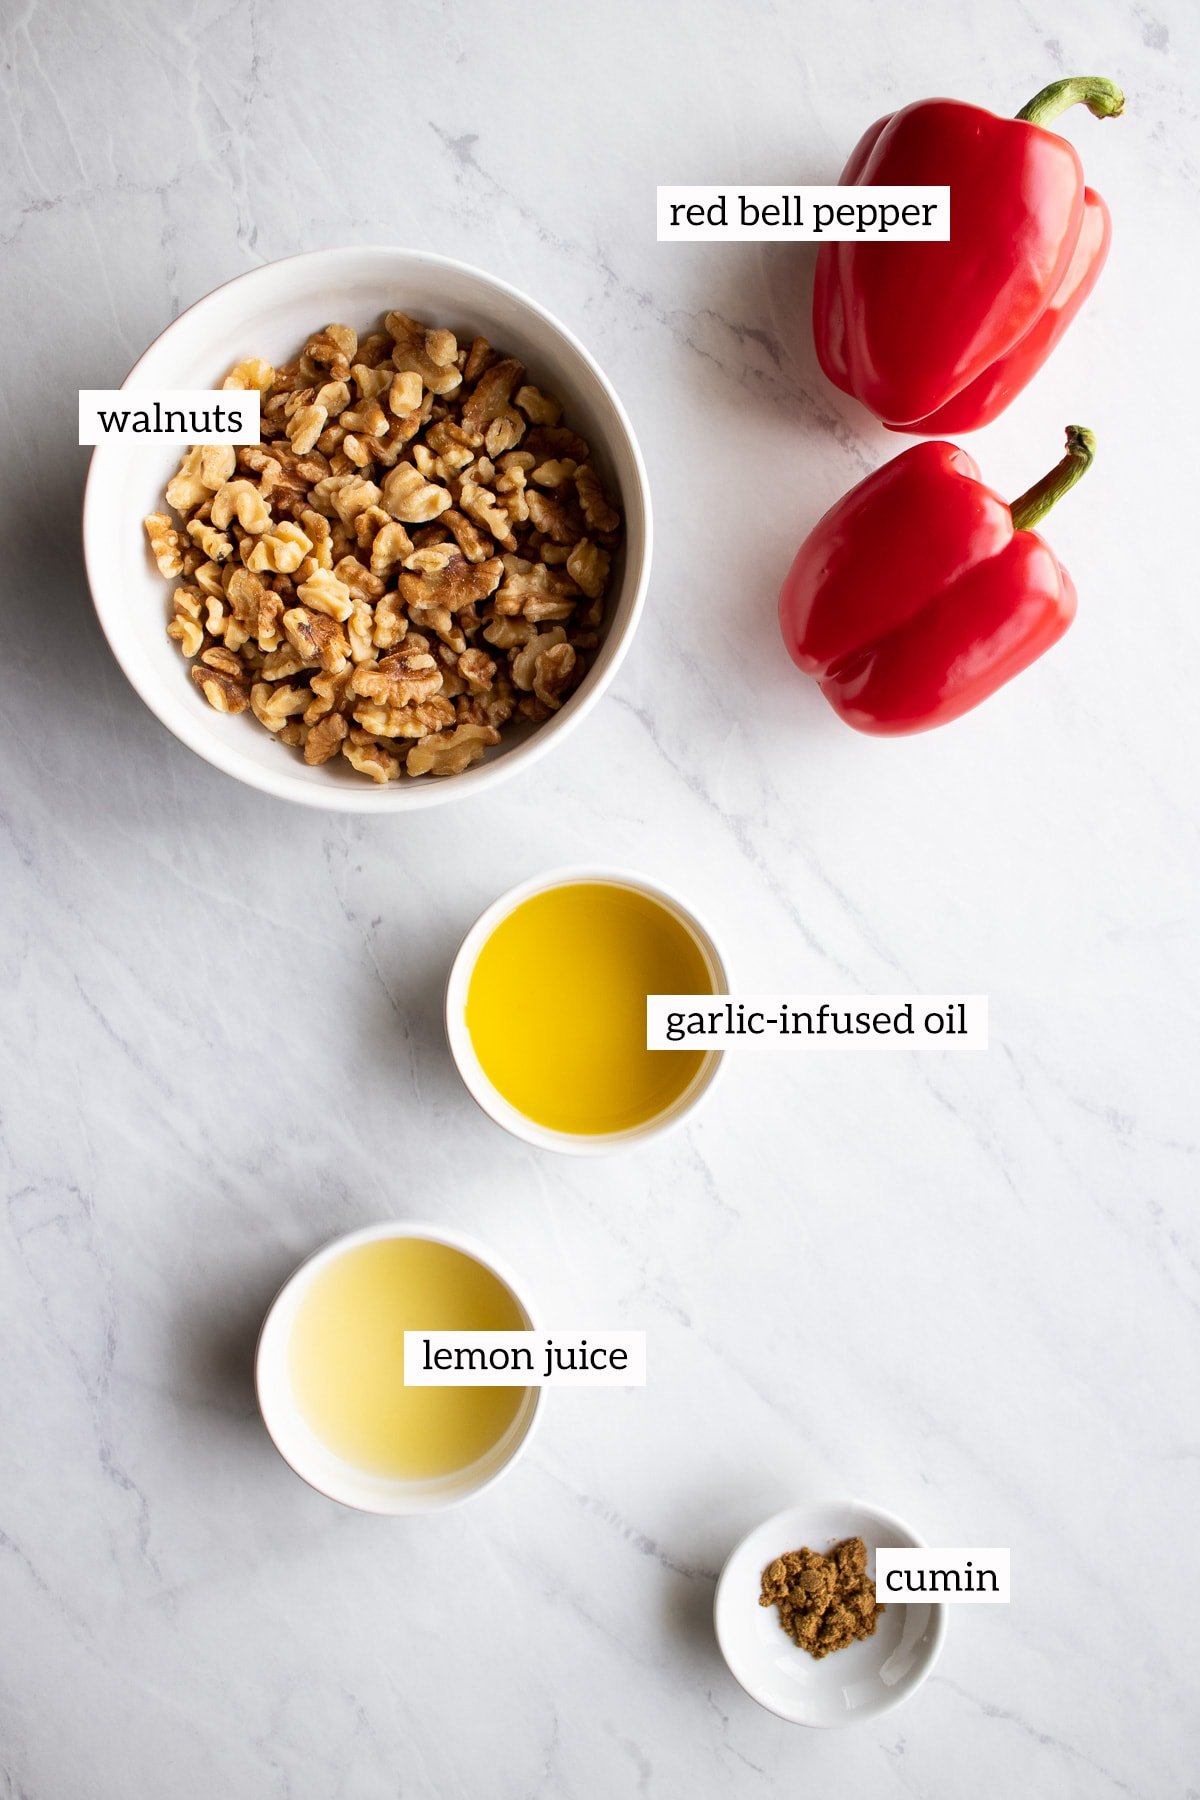 Ingredients needed for this low FODMAP red pepper and walnut dip are measured out into white bowls on a white marble slab.